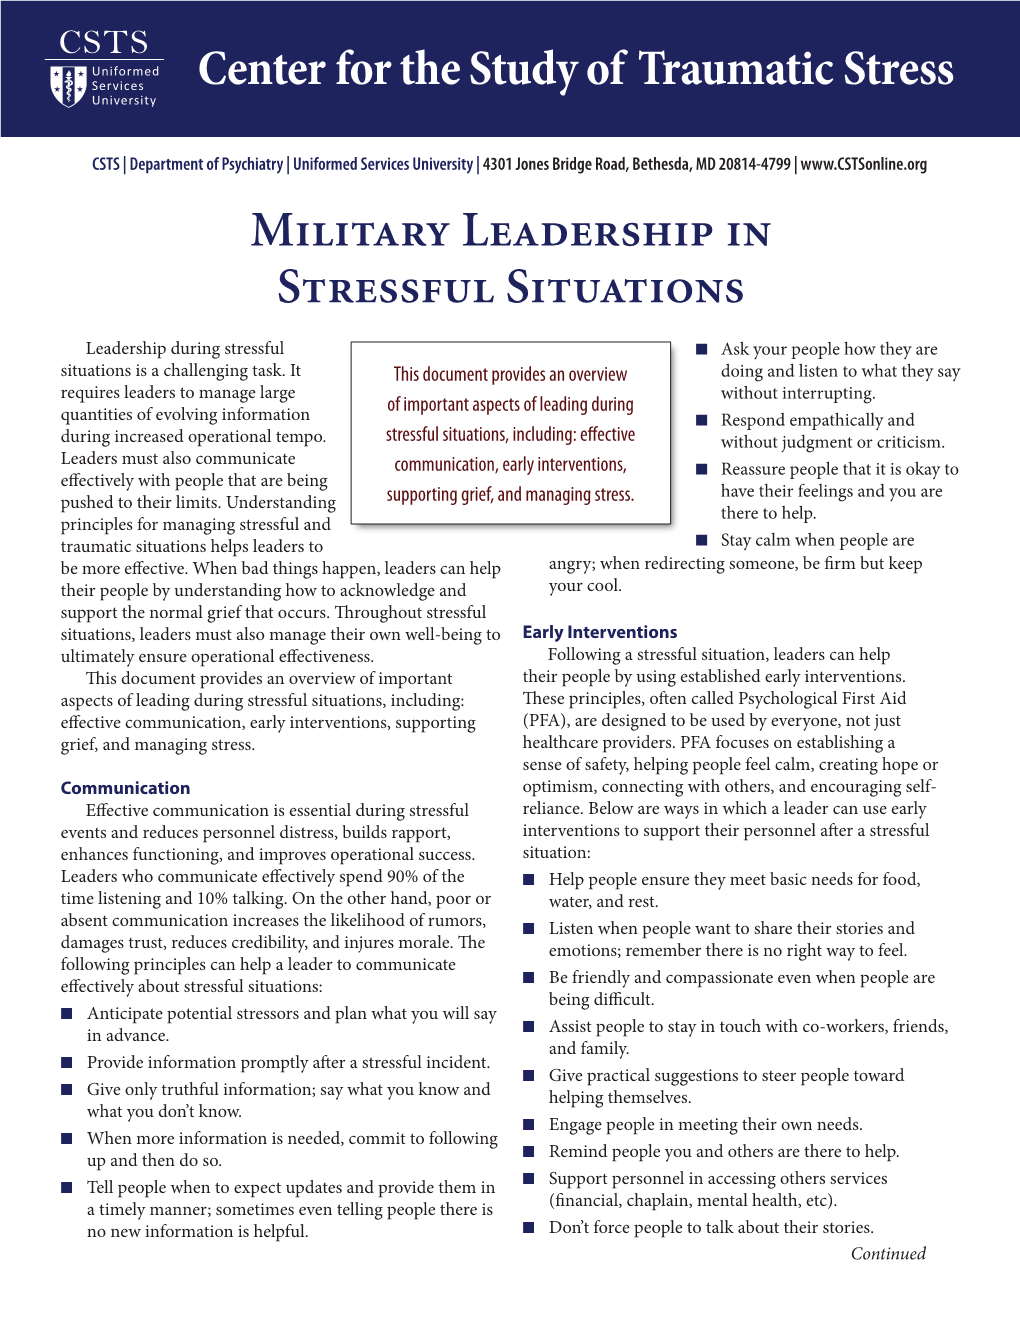 Military Leadership in Stressful Situations